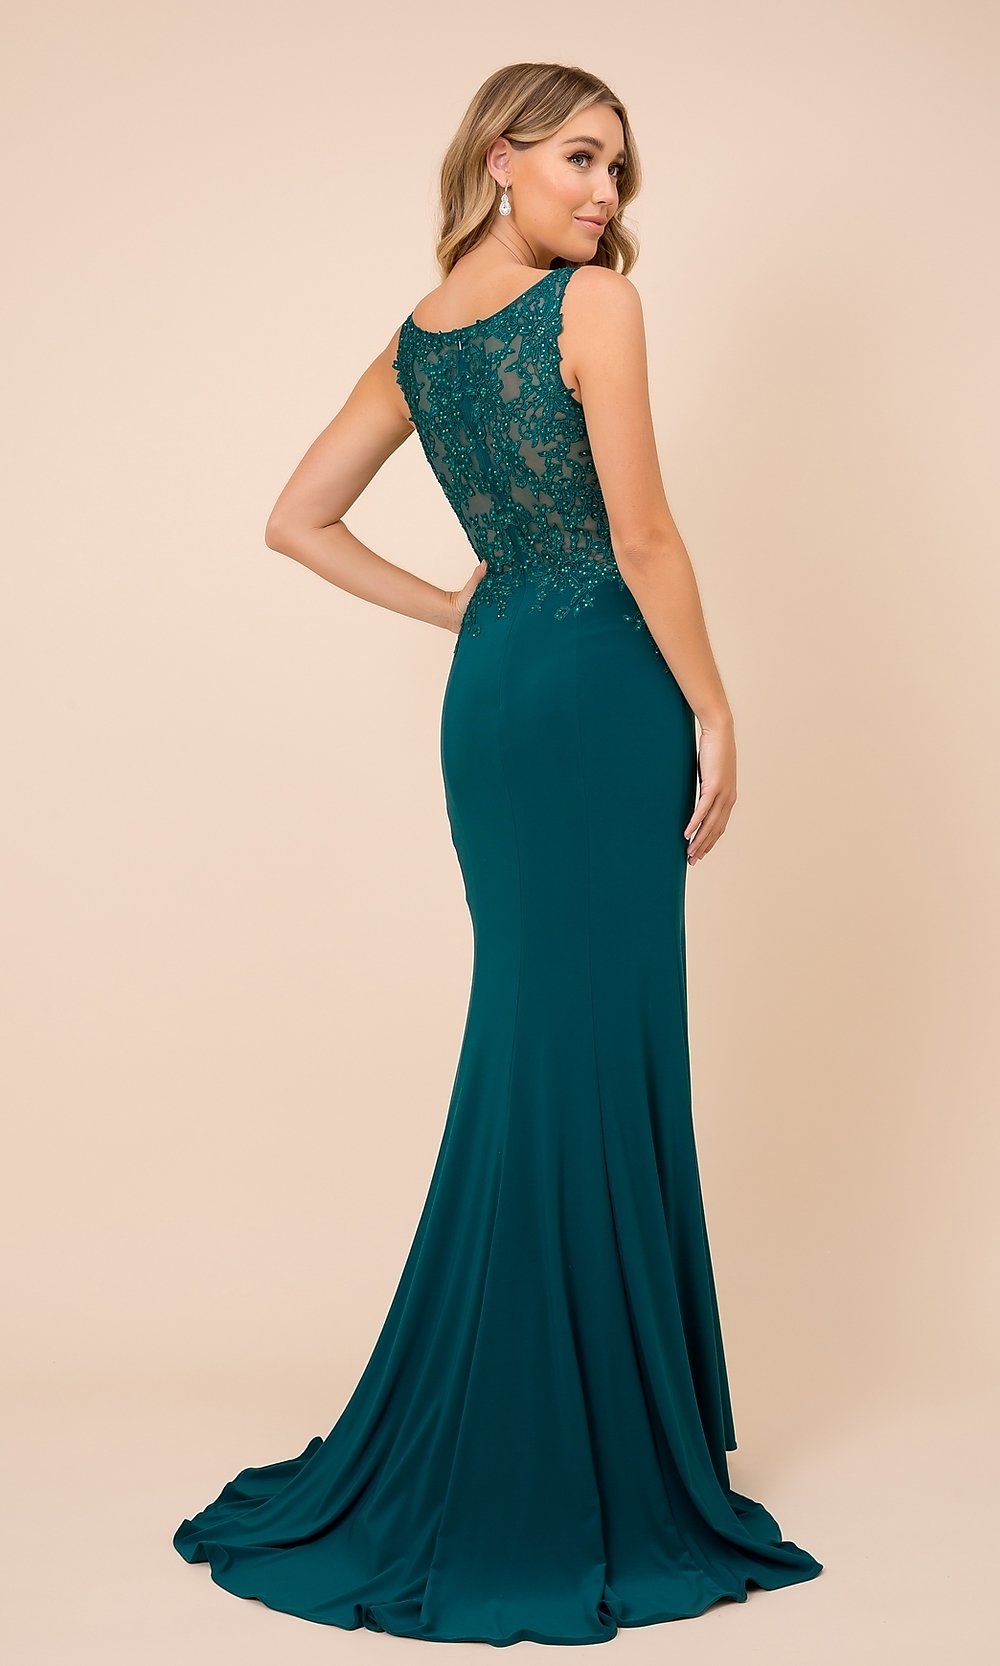  Embroidered Sheer-Bodice Long Formal Prom Gown